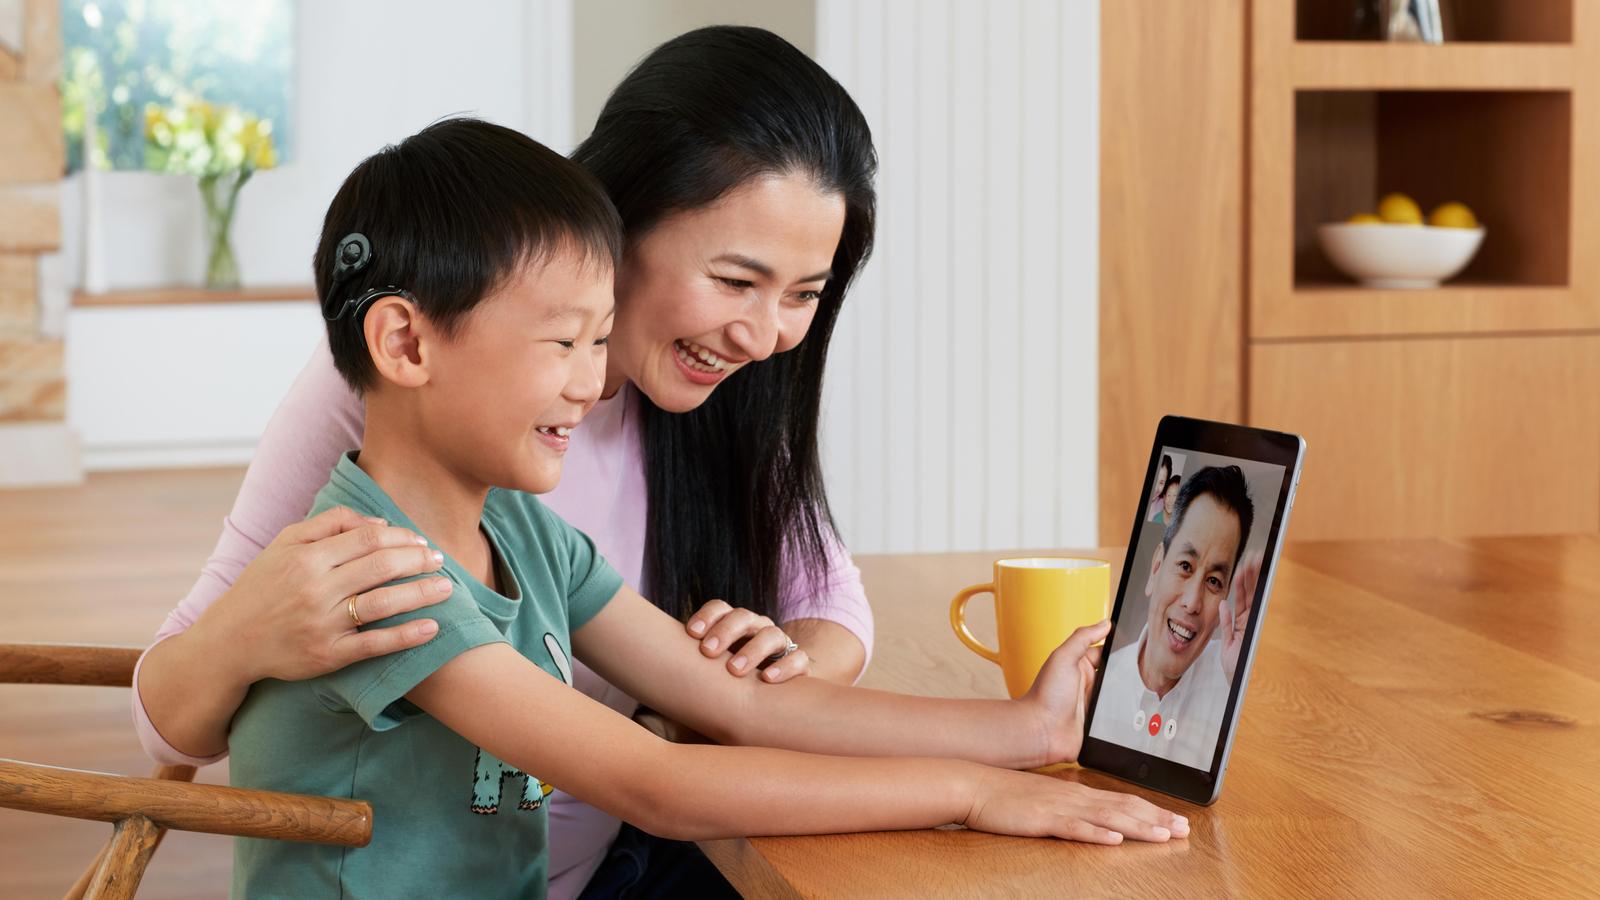 A family speak to each other via an iPad